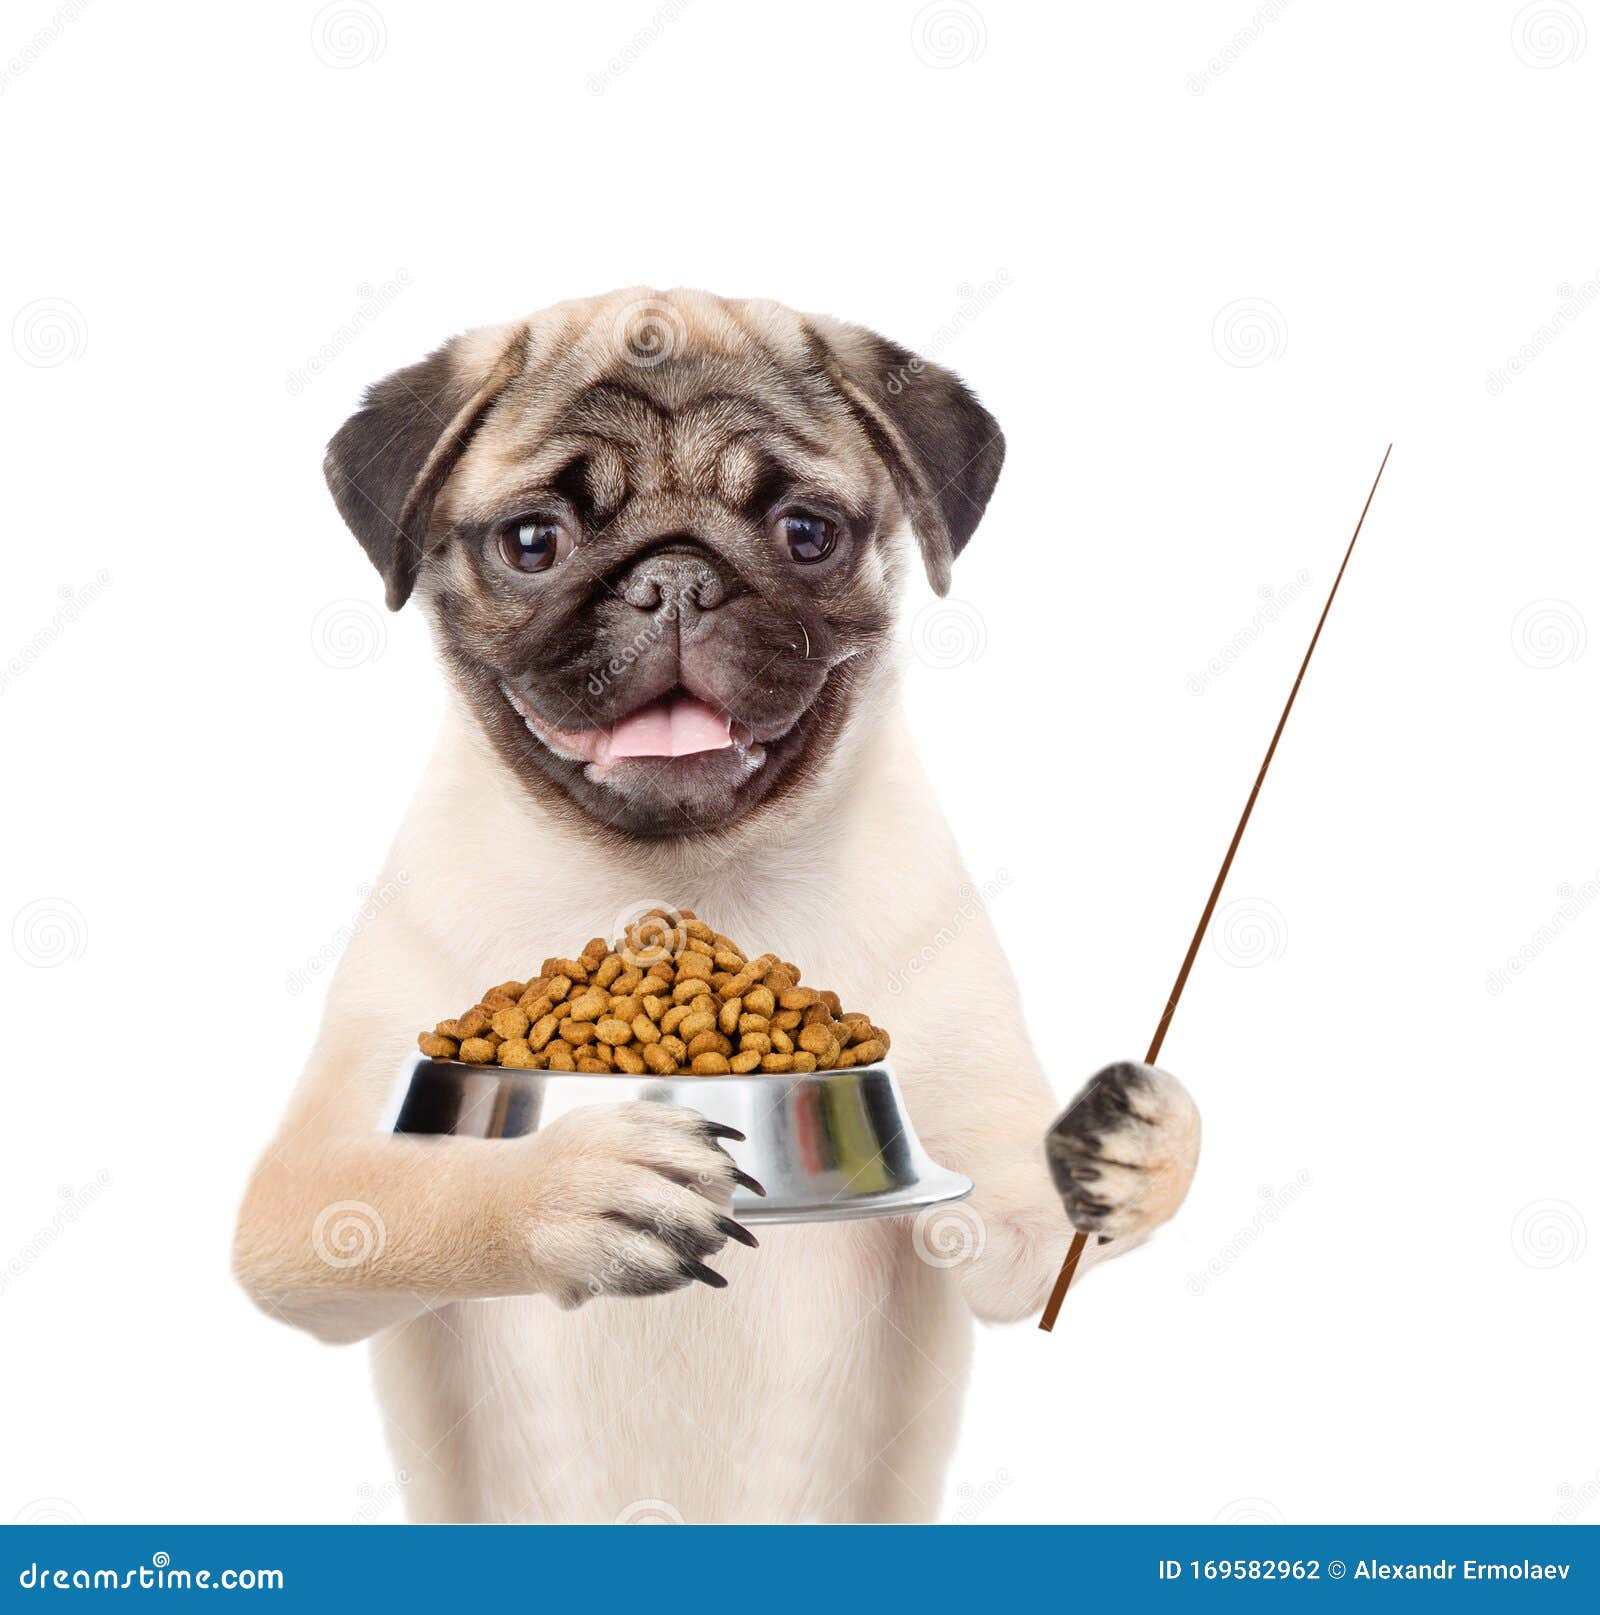 Pug Puppy Holding Bowl Of Dry Dog Food And Pointer Stick. Isolated On